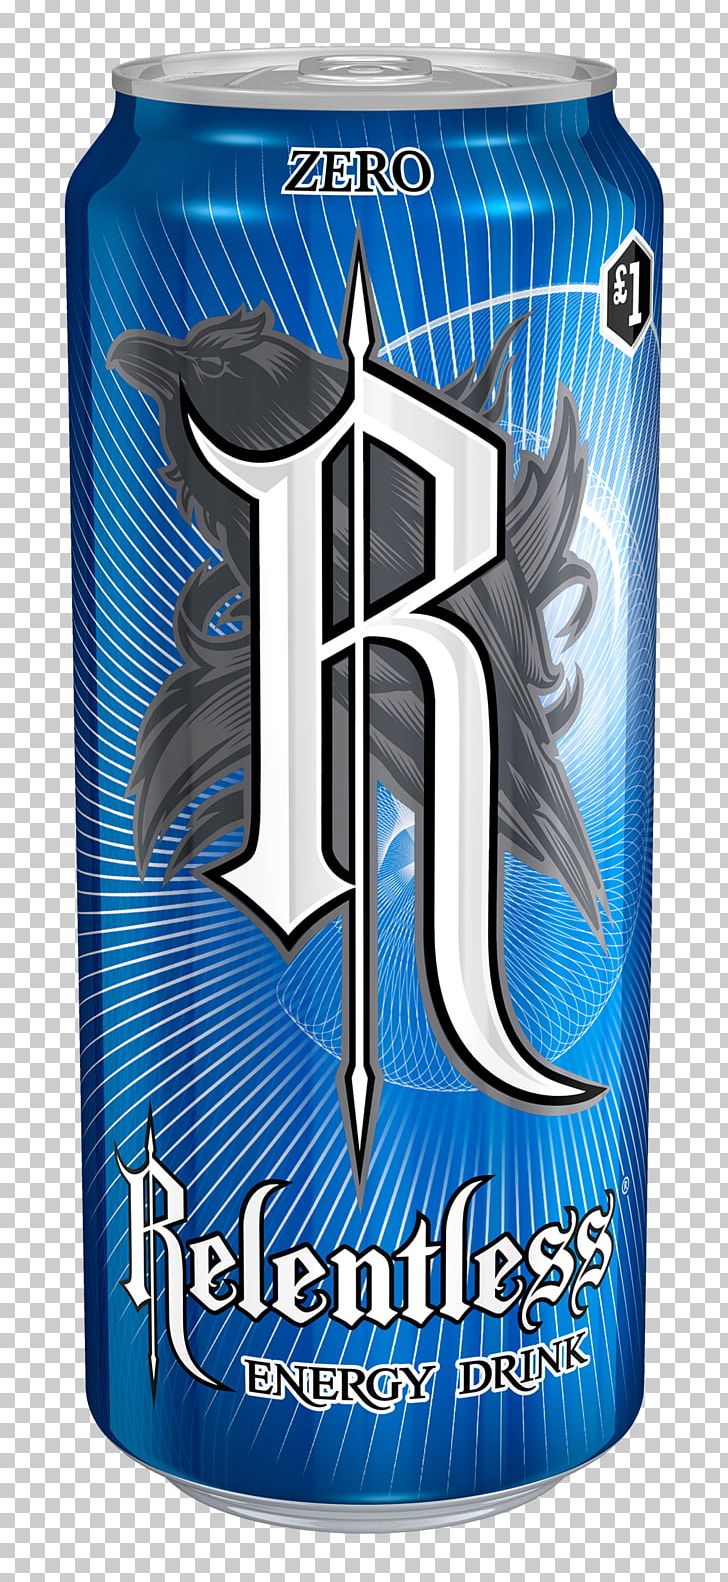 Energy Drink Fizzy Drinks Juice Relentless Beverage Can PNG, Clipart, Aluminum Can, Beverage Can, Brand, Cocacola Company, Electric Blue Free PNG Download